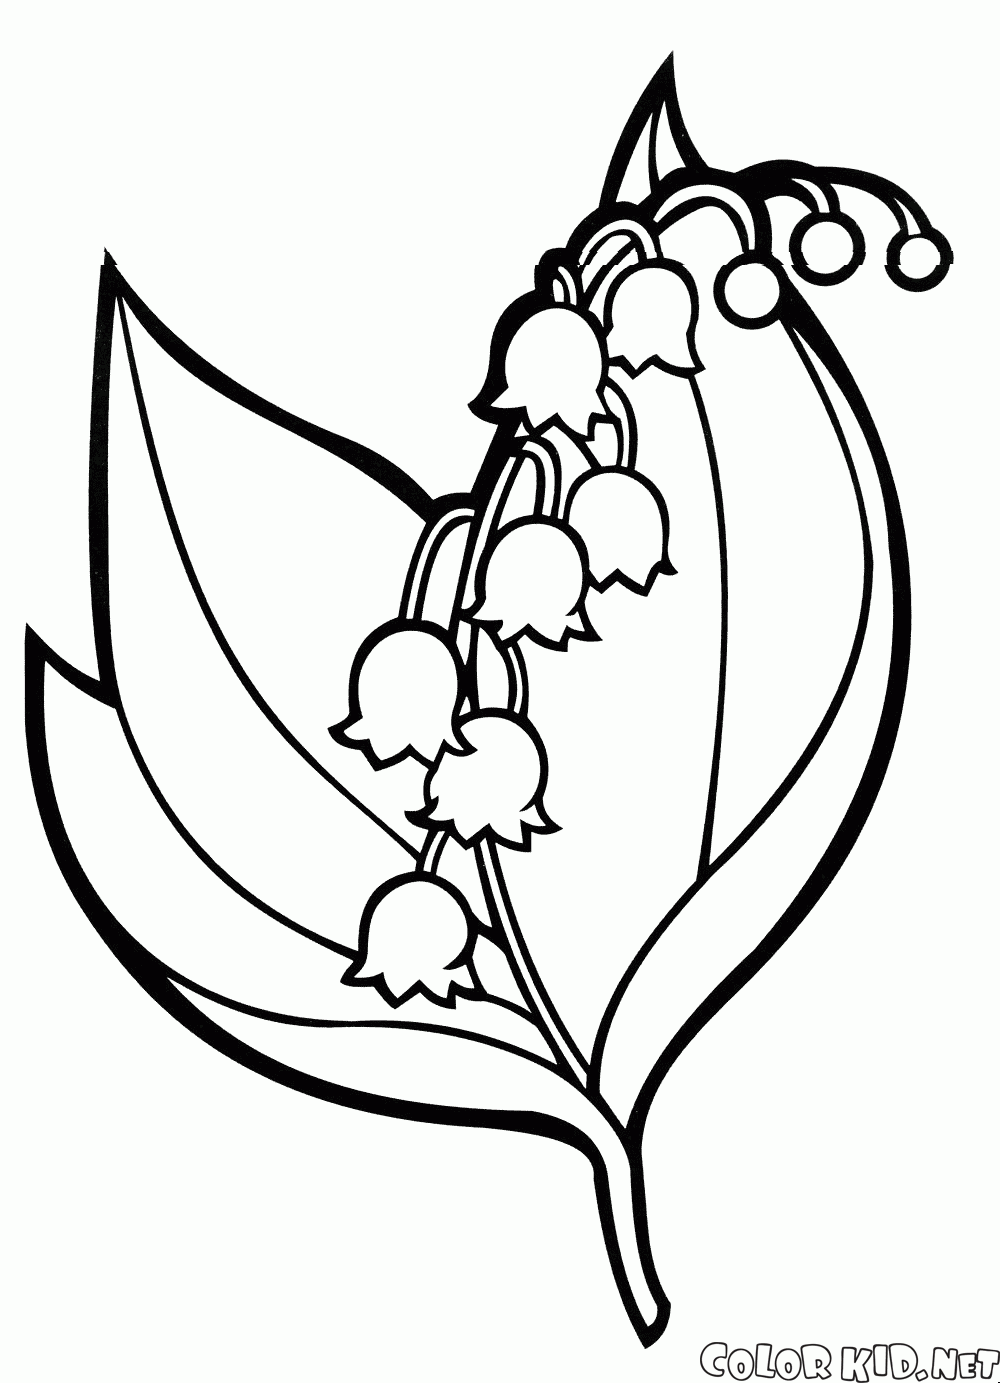 lily of the valley coloring page lily of the valley 4 coloring online super coloring coloring valley lily of page the 